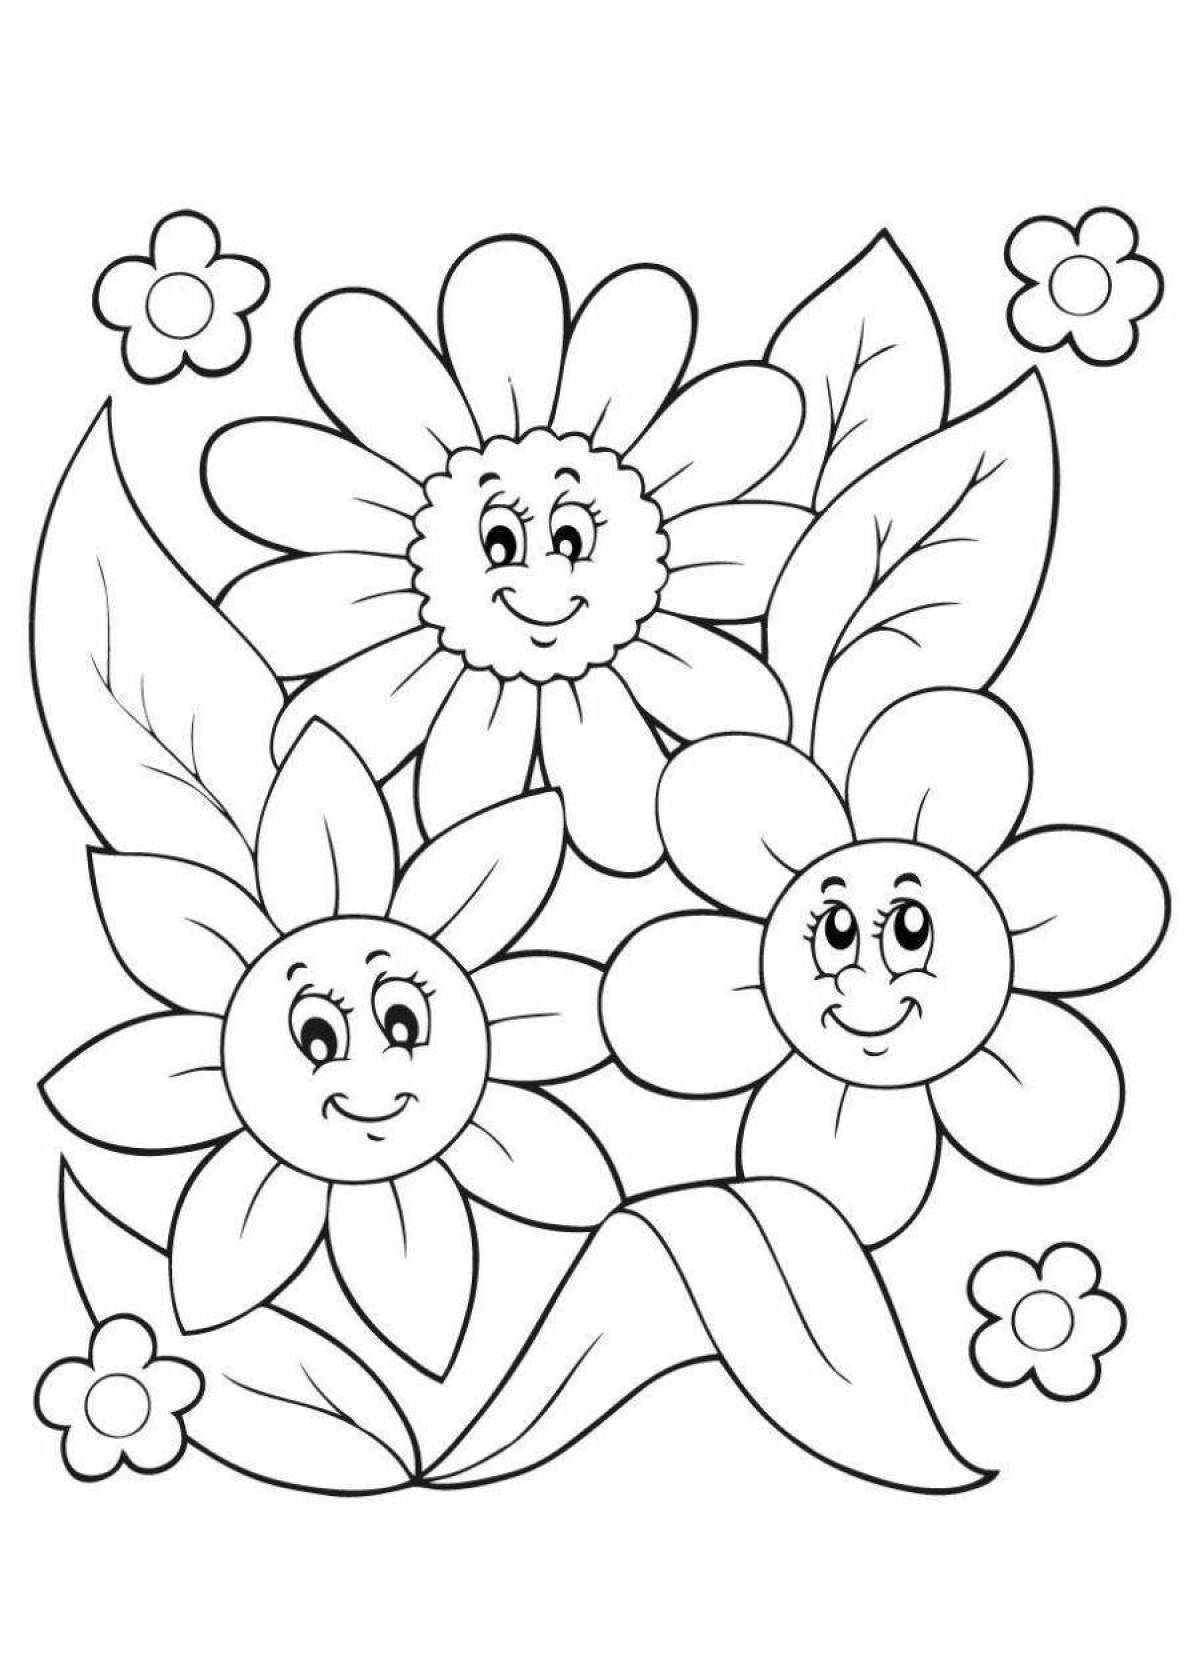 Adorable flower coloring for mom